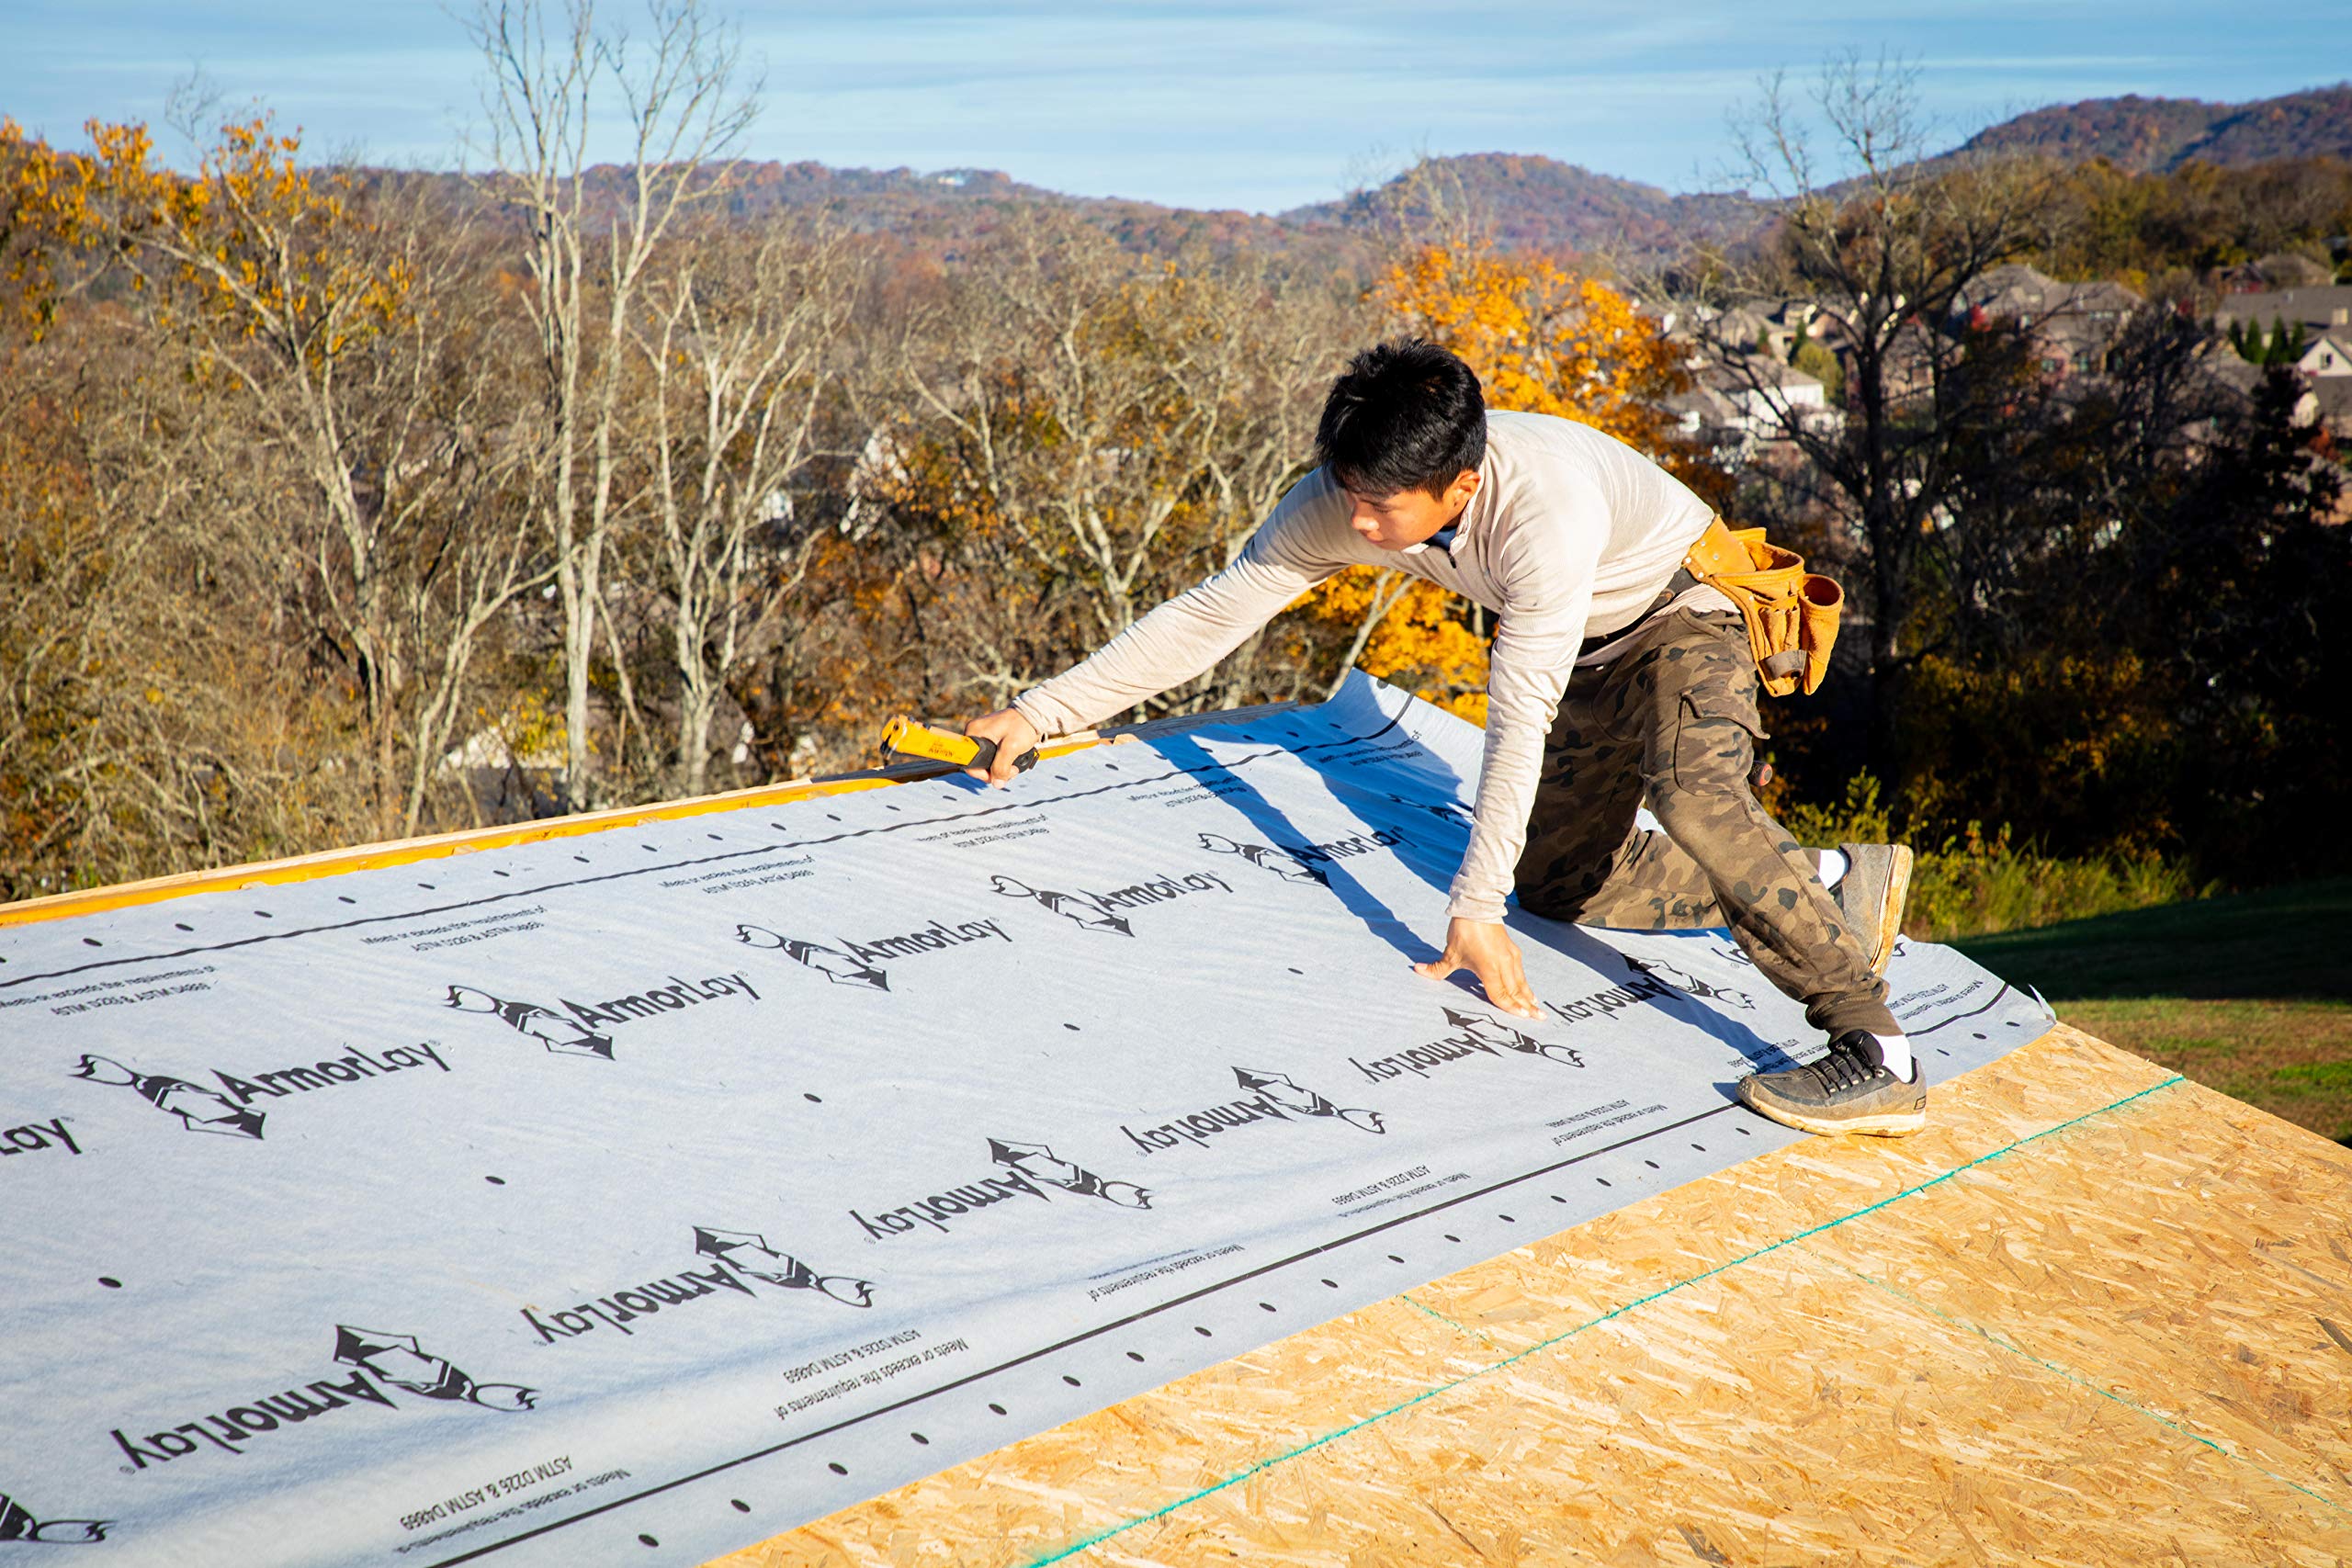 Can Roofing Underlayment Be Used on Walls